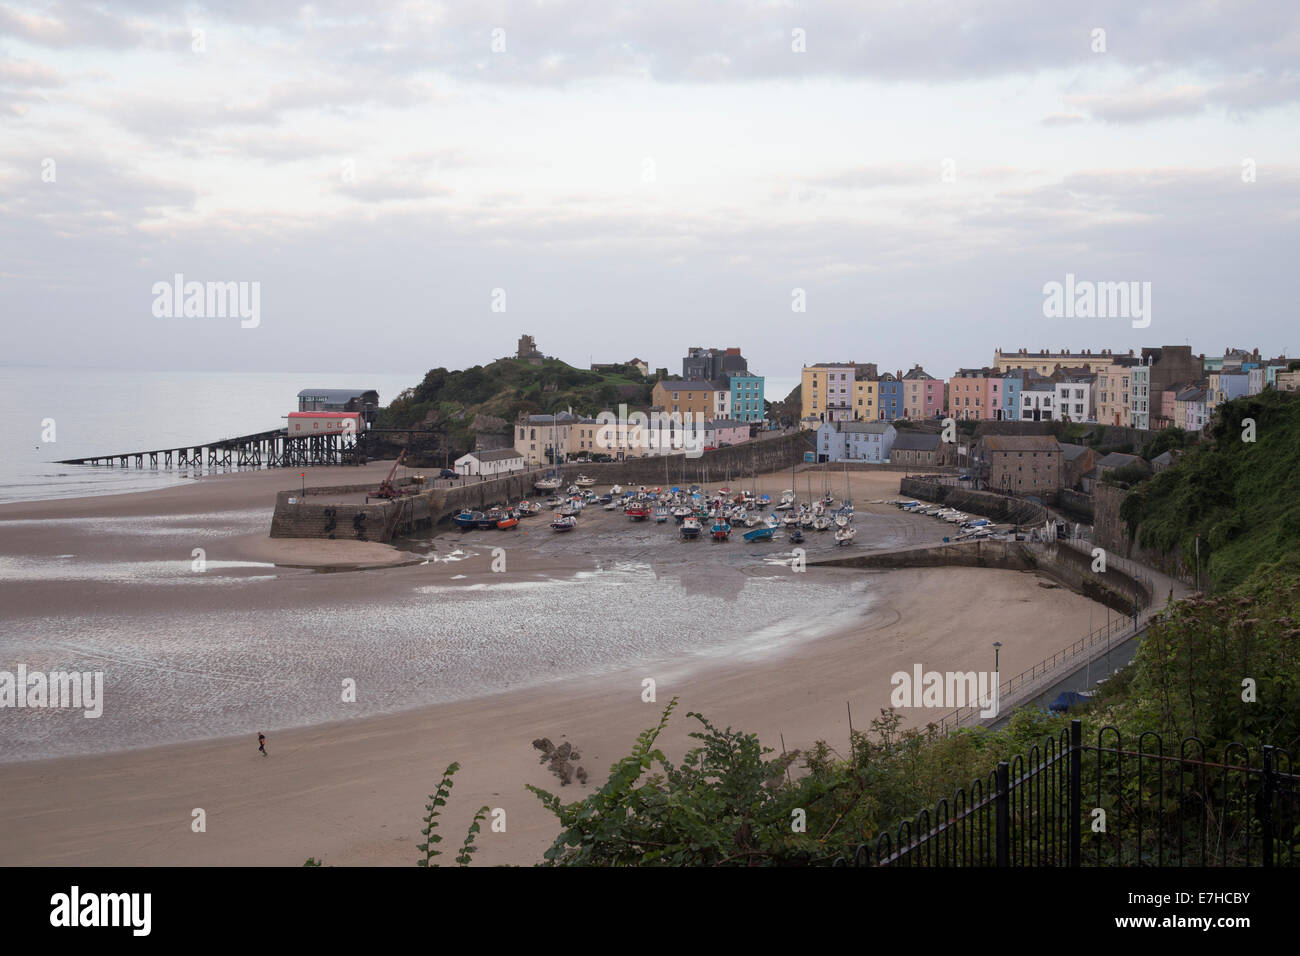 Tenby harbour at dusk. Low tide. Boats on sand. Stock Photo